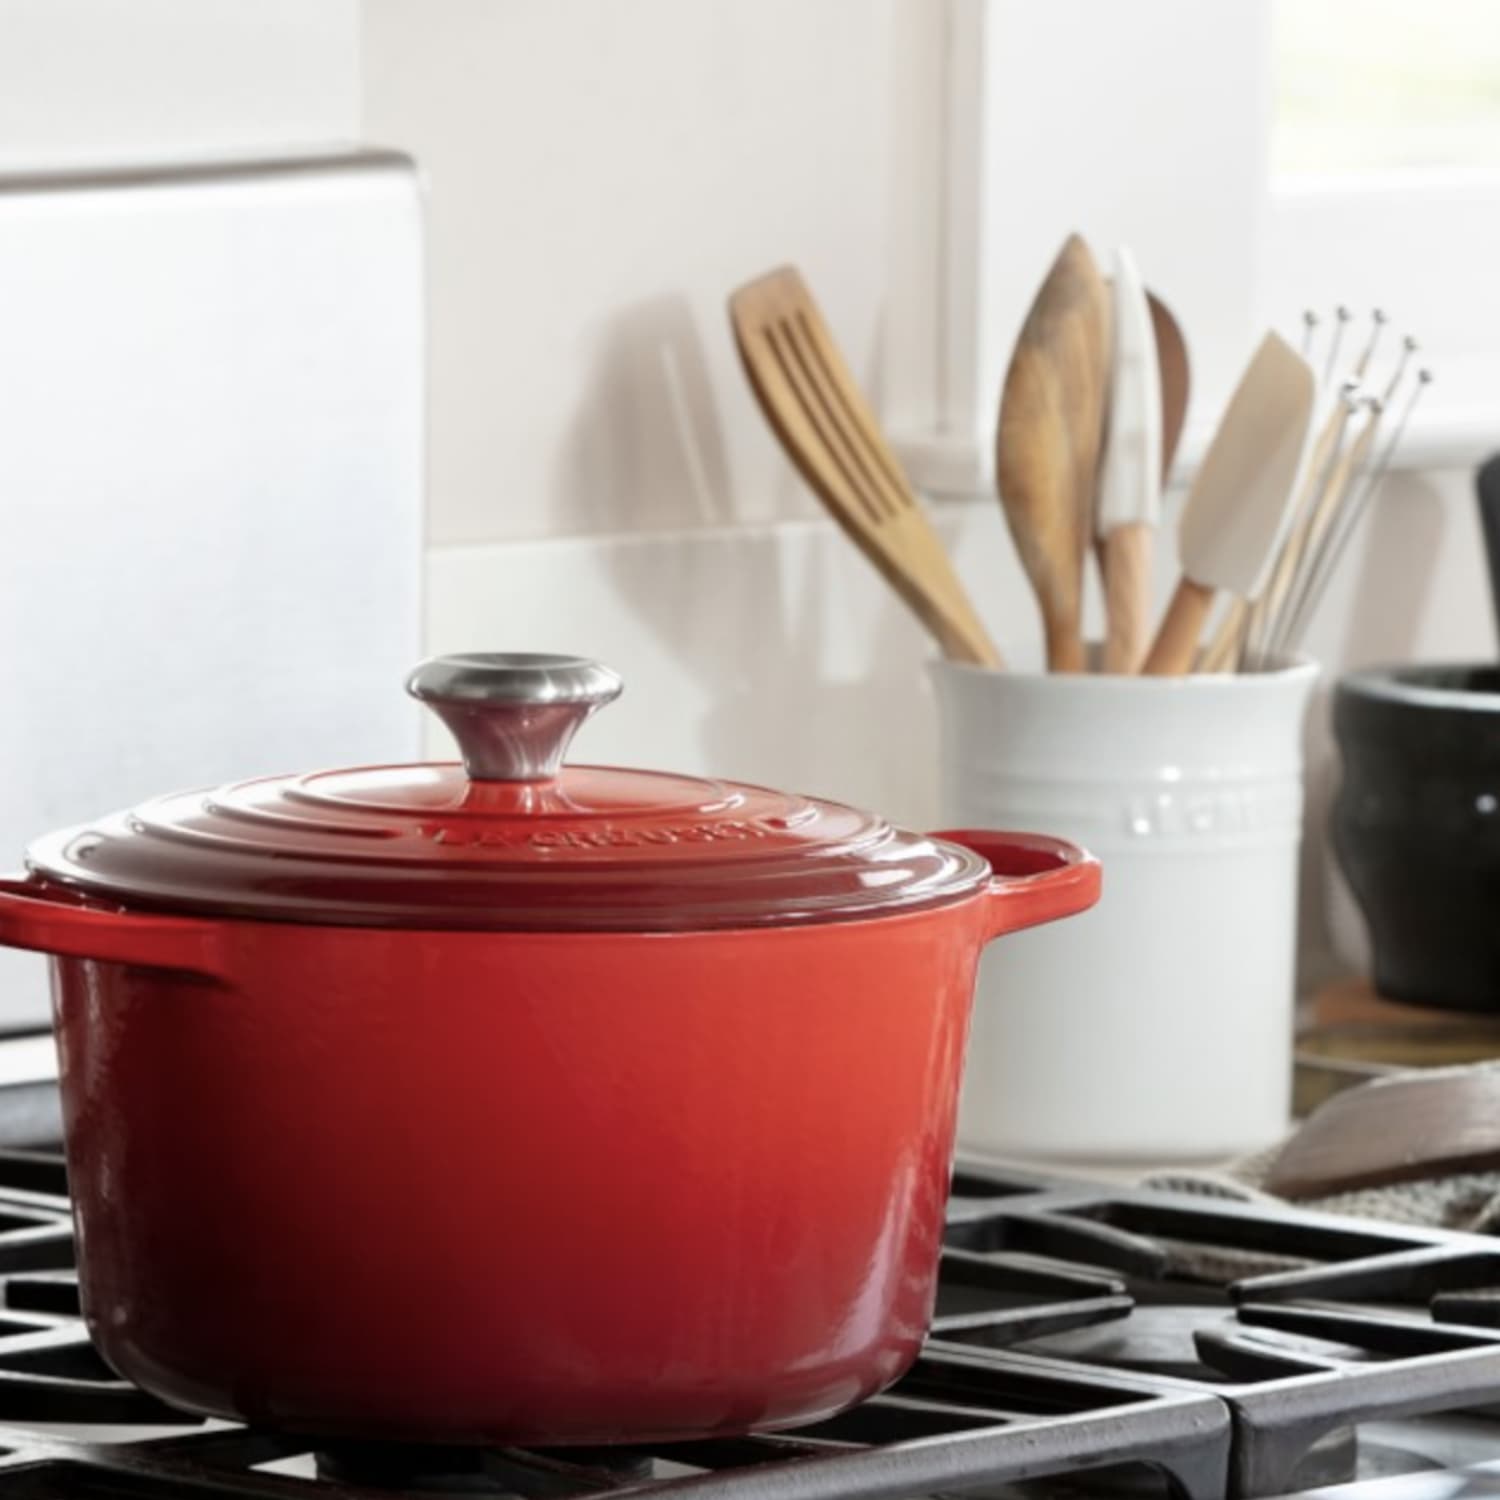 https://cdn.apartmenttherapy.info/image/upload/f_jpg,q_auto:eco,c_fill,g_auto,w_1500,ar_1:1/commerce%2FLe-Creuset-Red-Deep-Oven